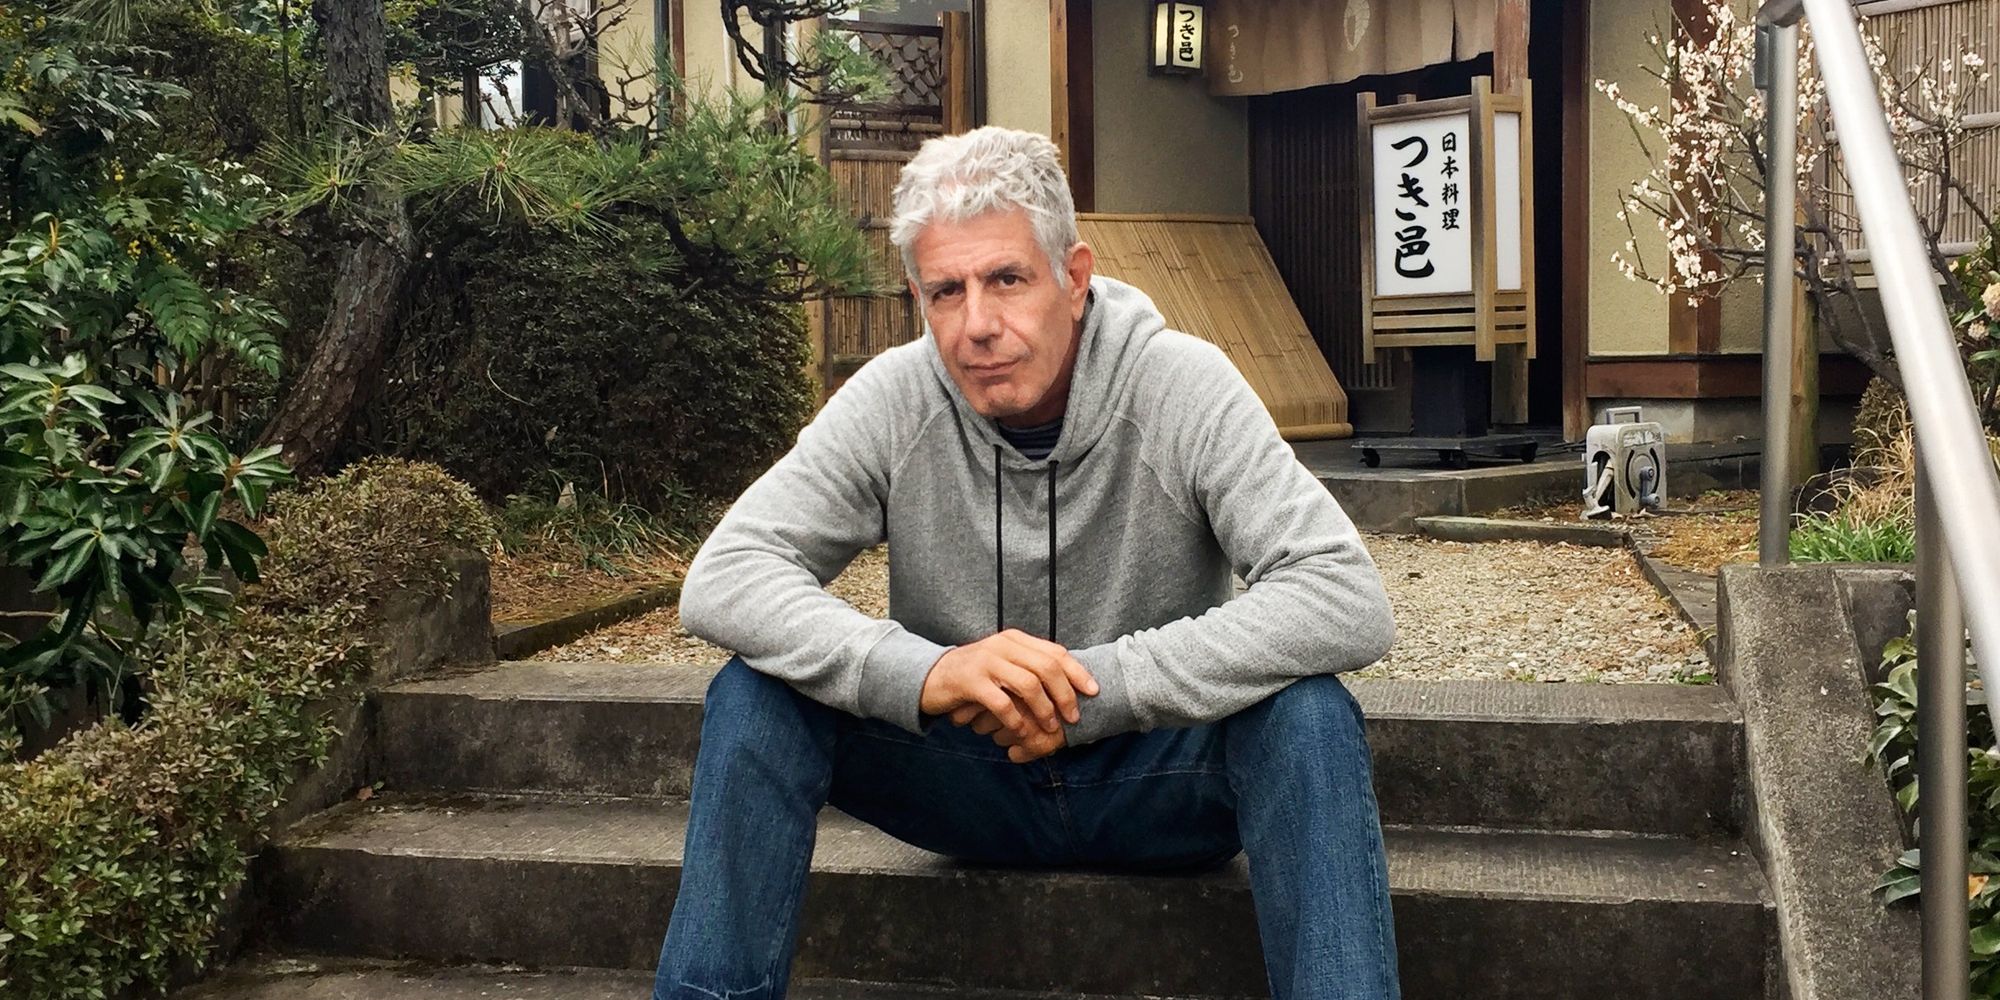 Anthony Bourdain sits on a stoop and poses for a picture 